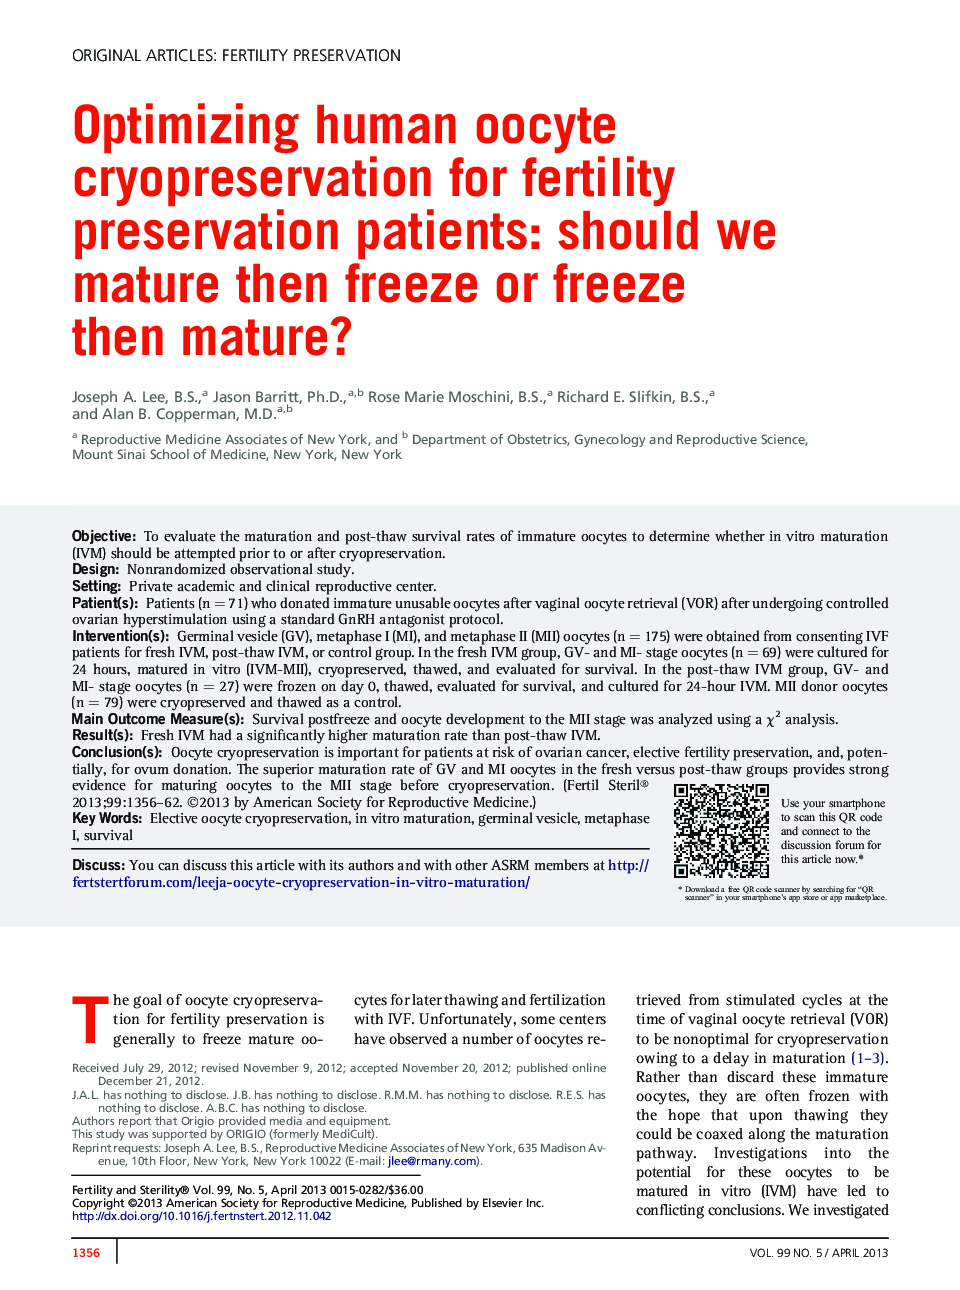 Optimizing human oocyte cryopreservation for fertility preservation patients: should we mature then freeze or freeze then mature? 